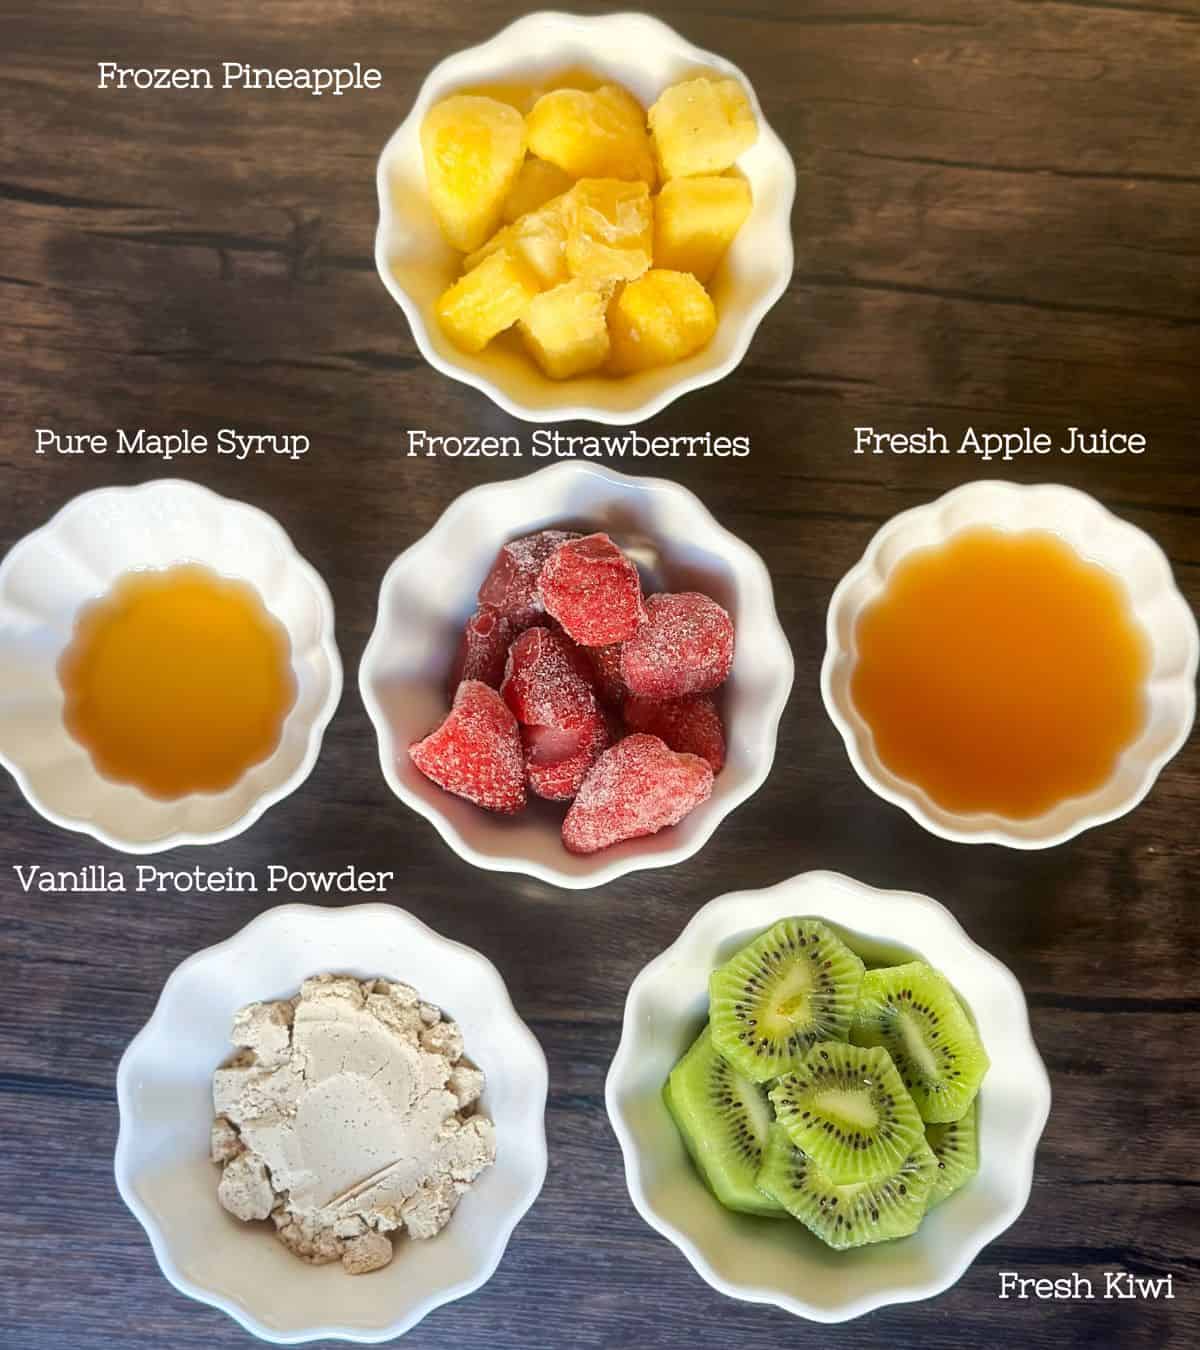 5 white ramekins in a star pattern with the ingredients in each of them for a pineapple surf smoothie with the names of the ingredients to the side written in white. The ingredients are Fresh kiwi, vanilla protein powder, frozen pineapple, frozen strawberry, pure maple syrup, and fresh apple juice.